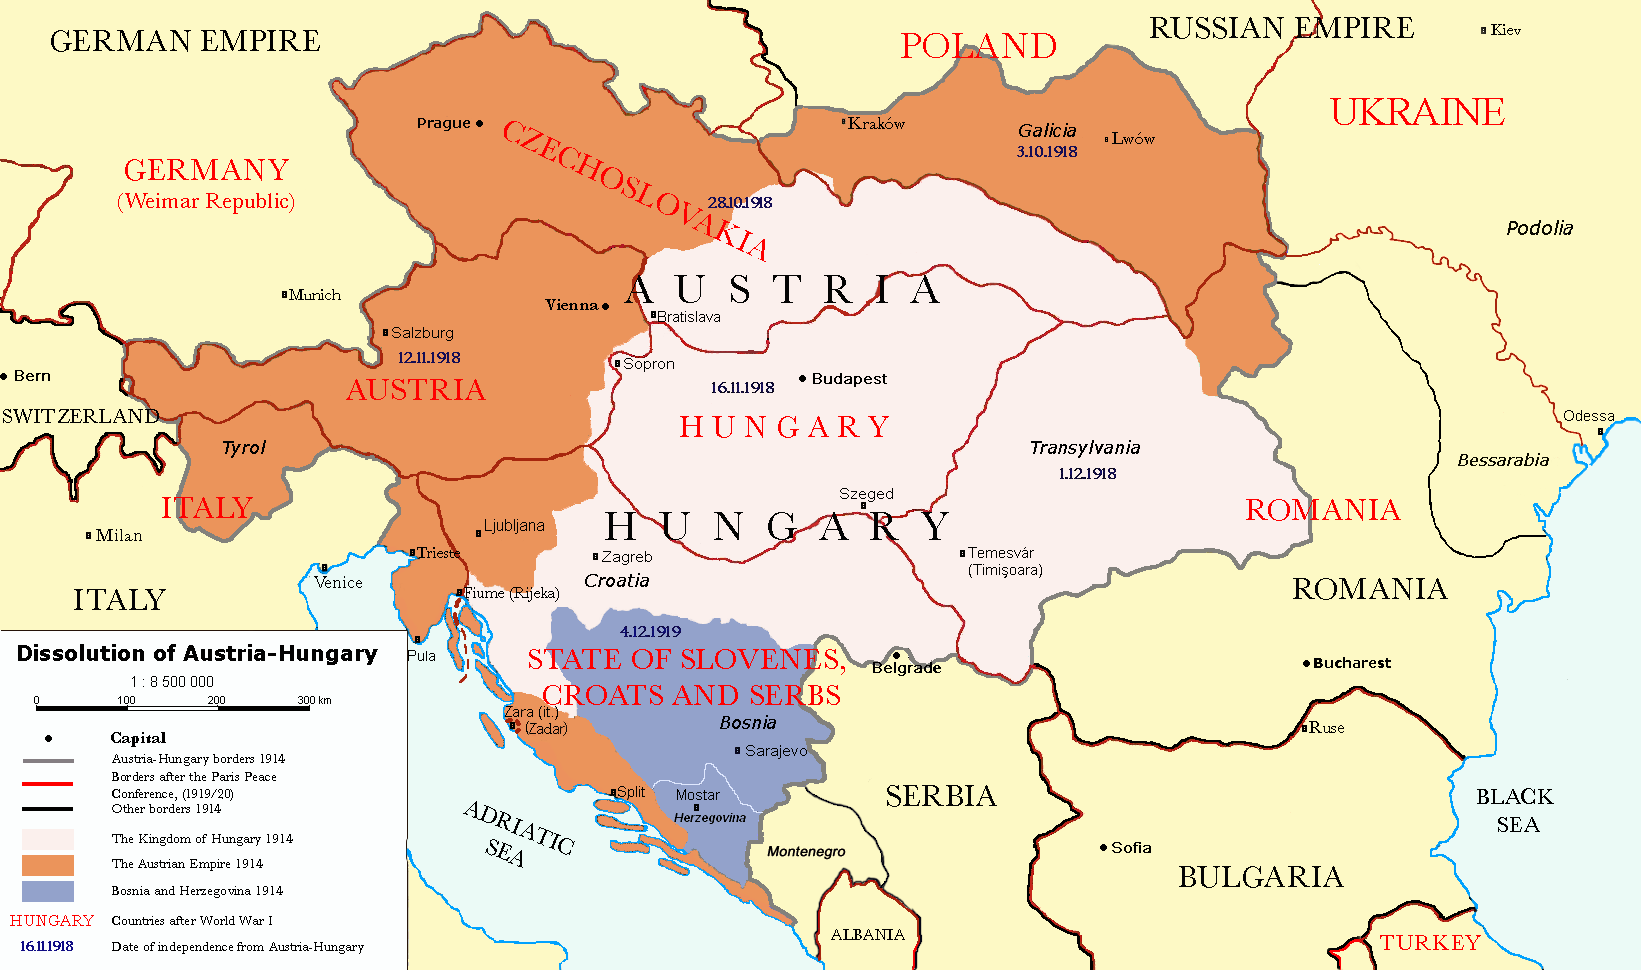 http://upload.wikimedia.org/wikipedia/commons/5/50/Dissolution_of_Austria-Hungary.png